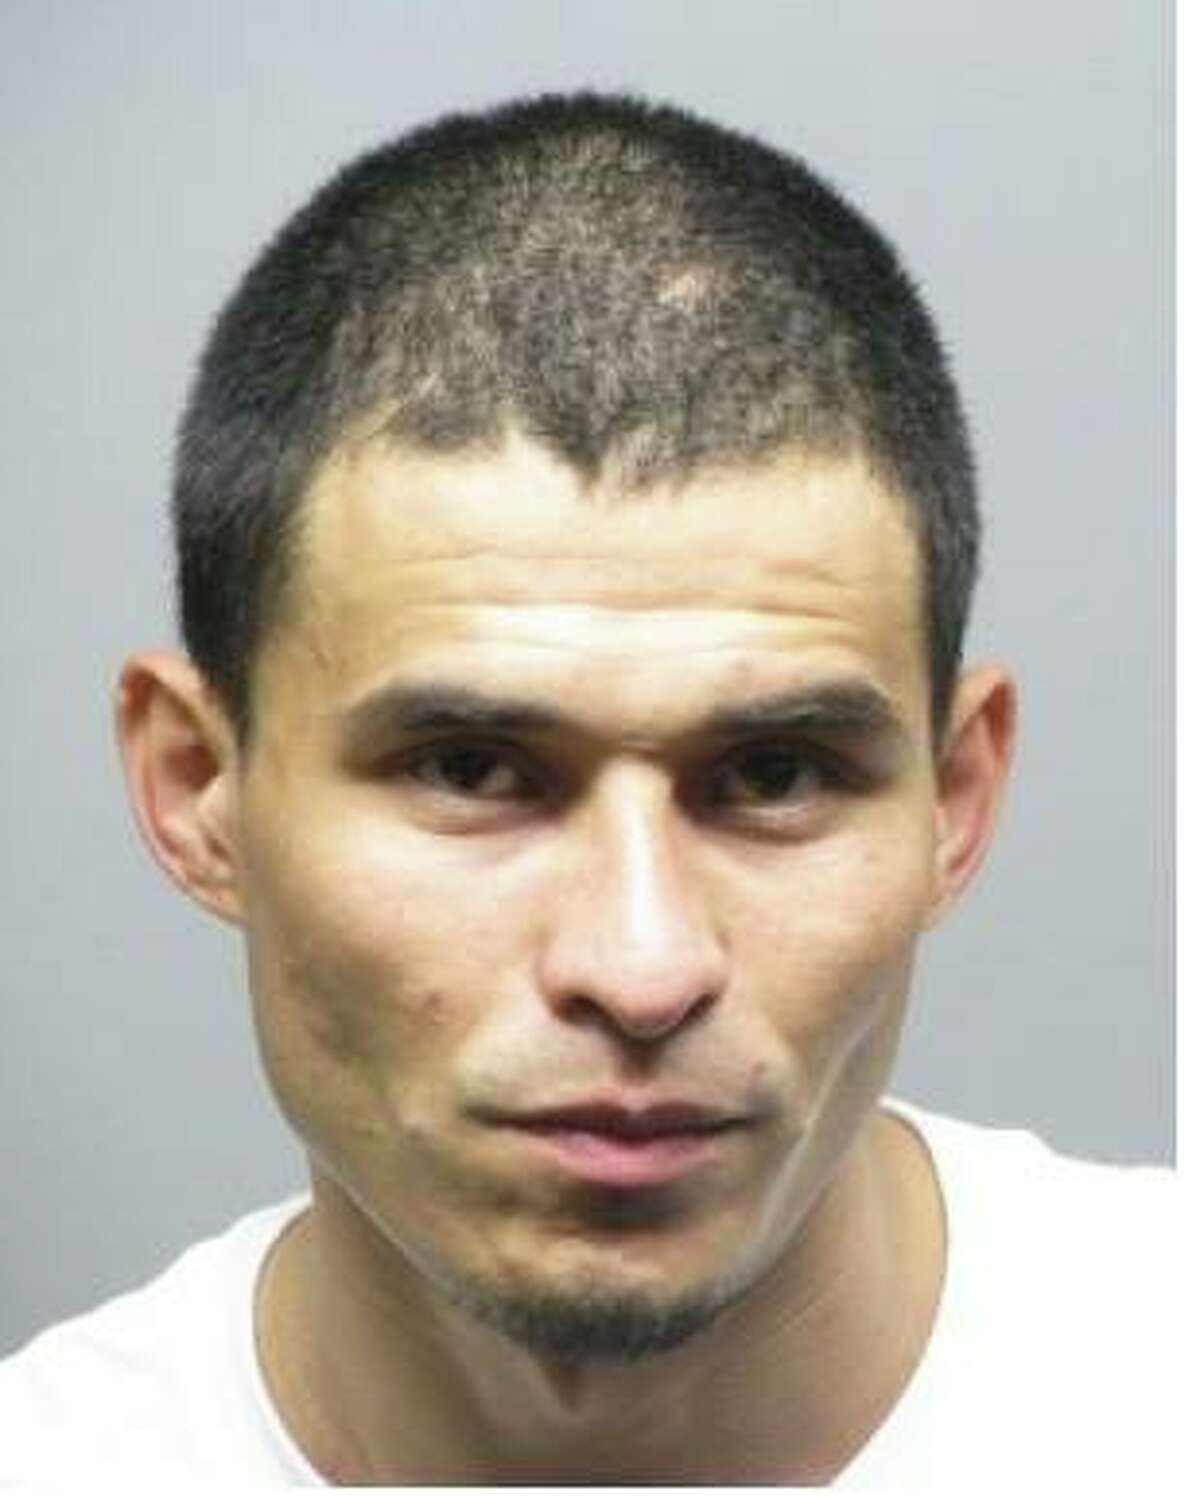 Jorge Garcia-Escamilla escaped from the Marsh Creek Detention Facility in Clayton, according to the Contra Costa County Sheriff’s Office.